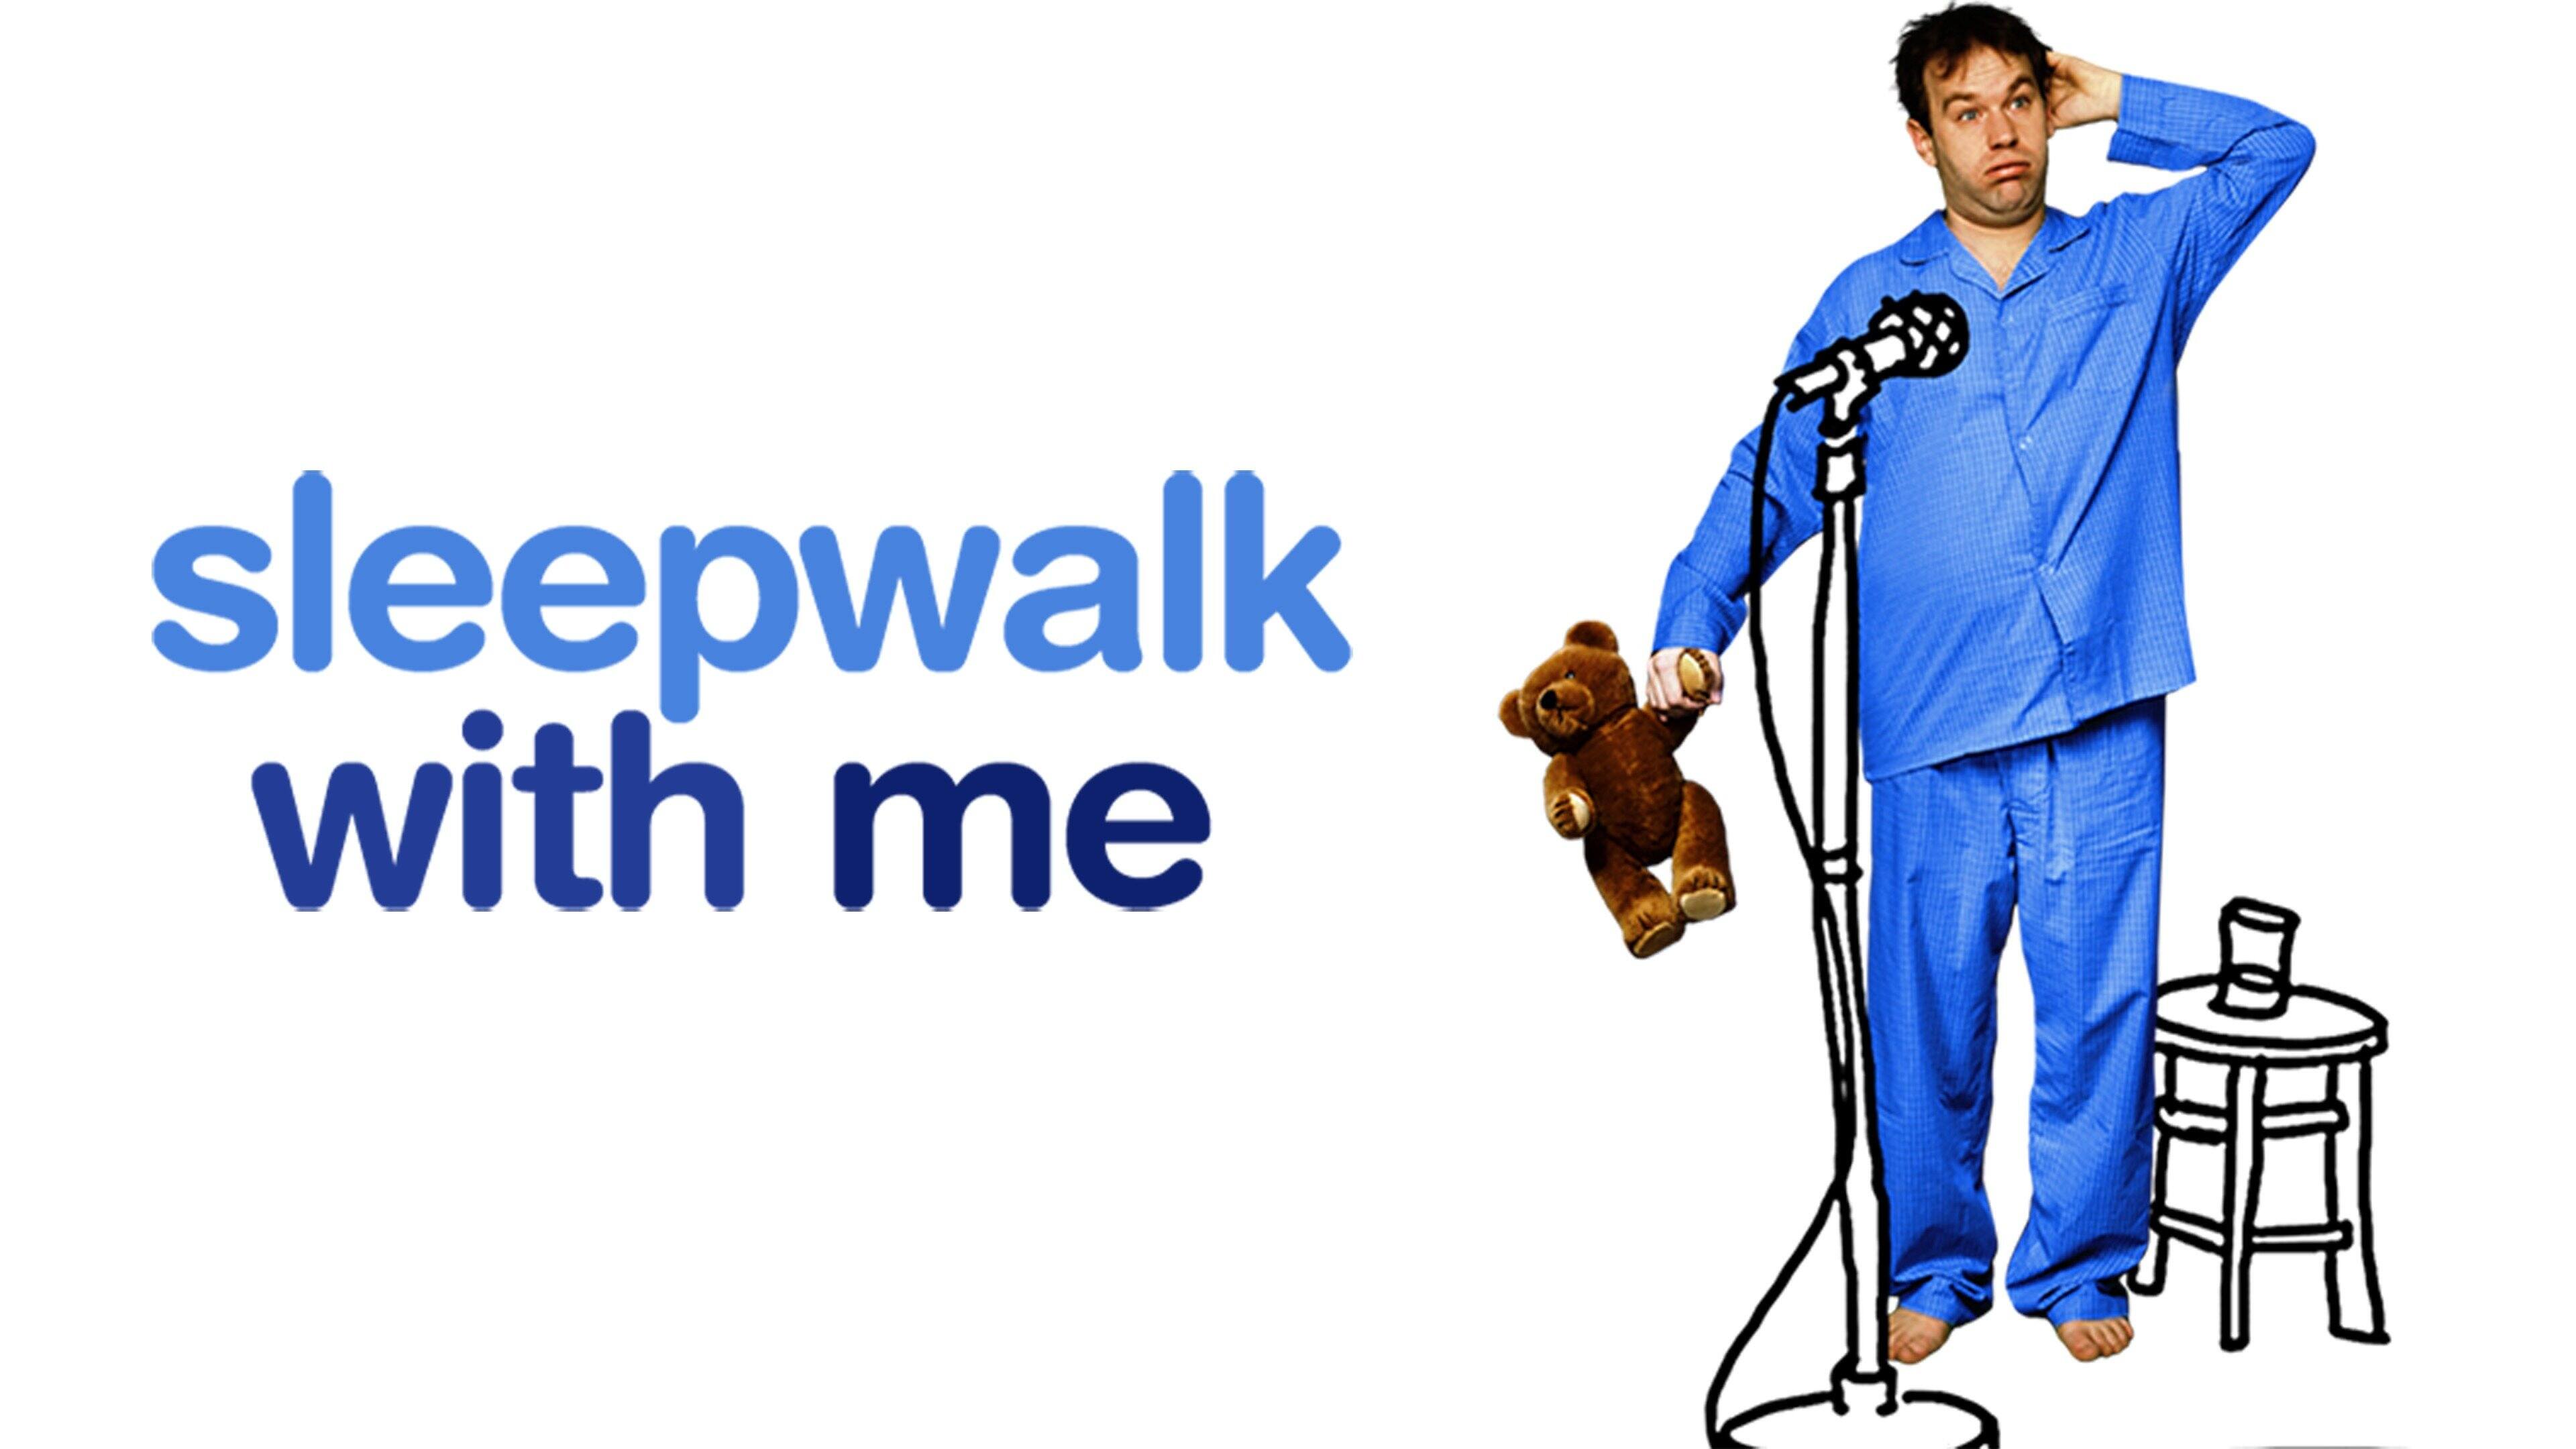 37-facts-about-the-movie-sleepwalk-with-me